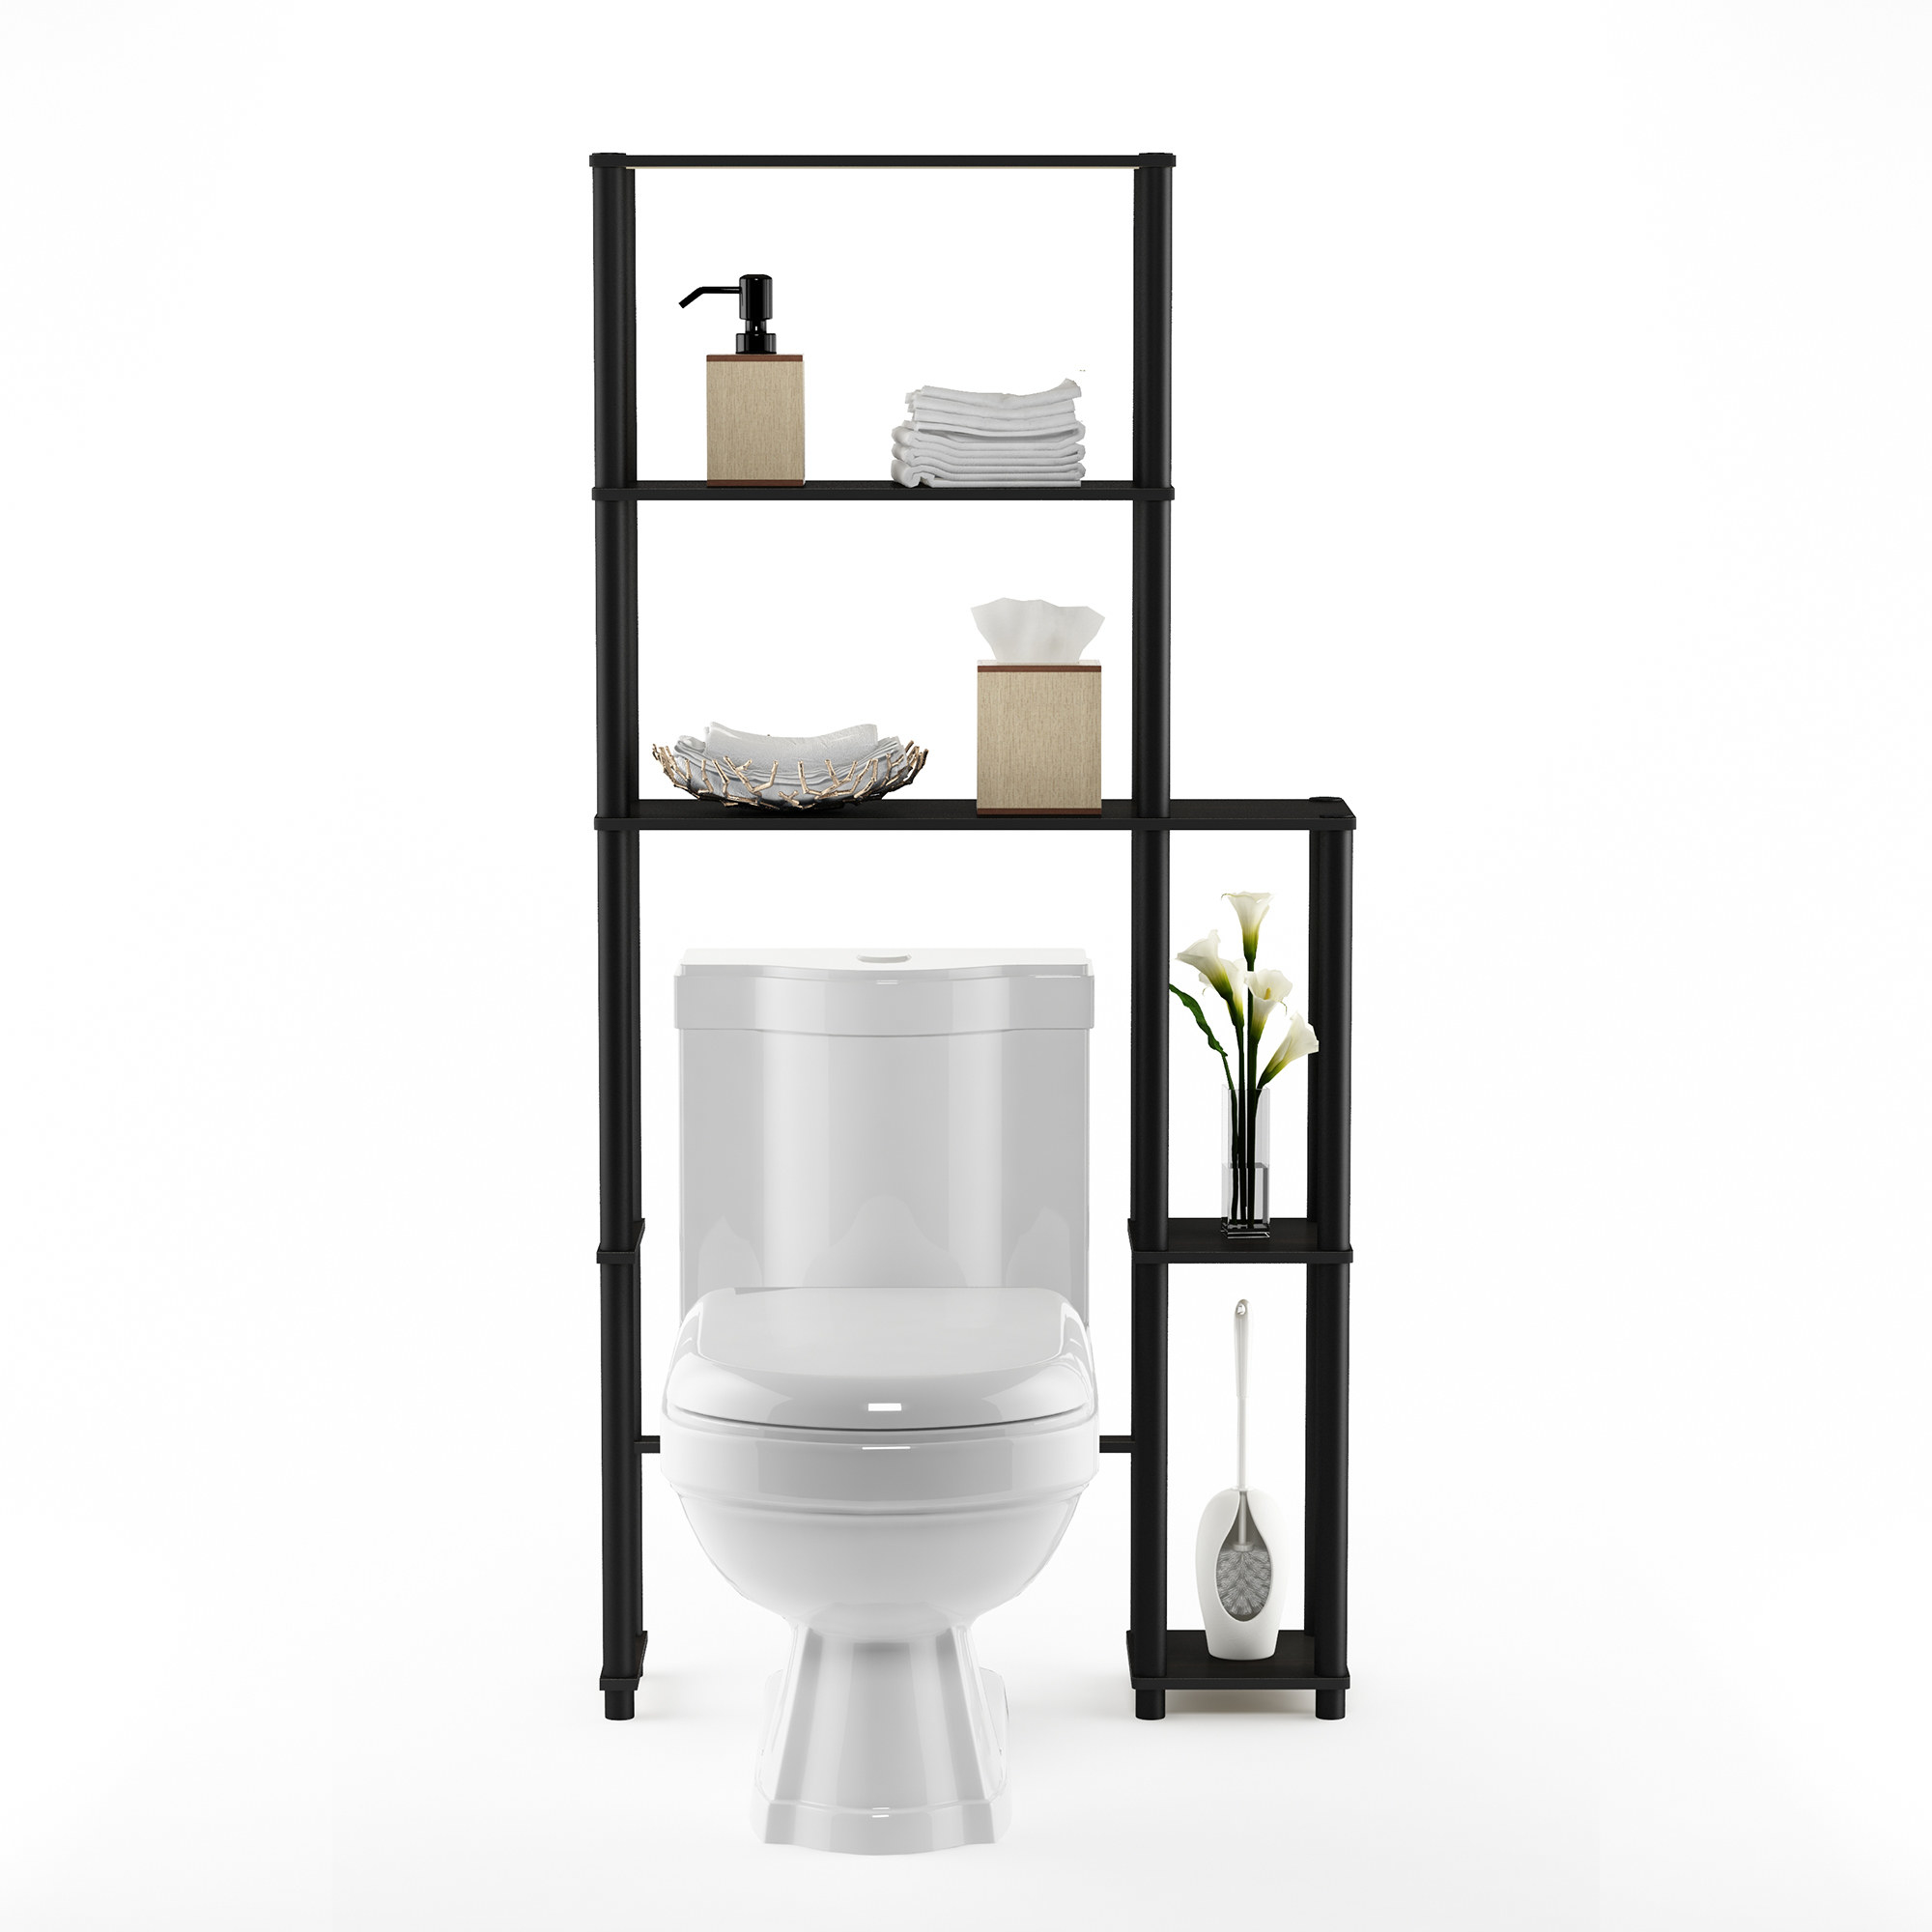 the bathroom shelf over a toilet with bathroom accessories on the shelves